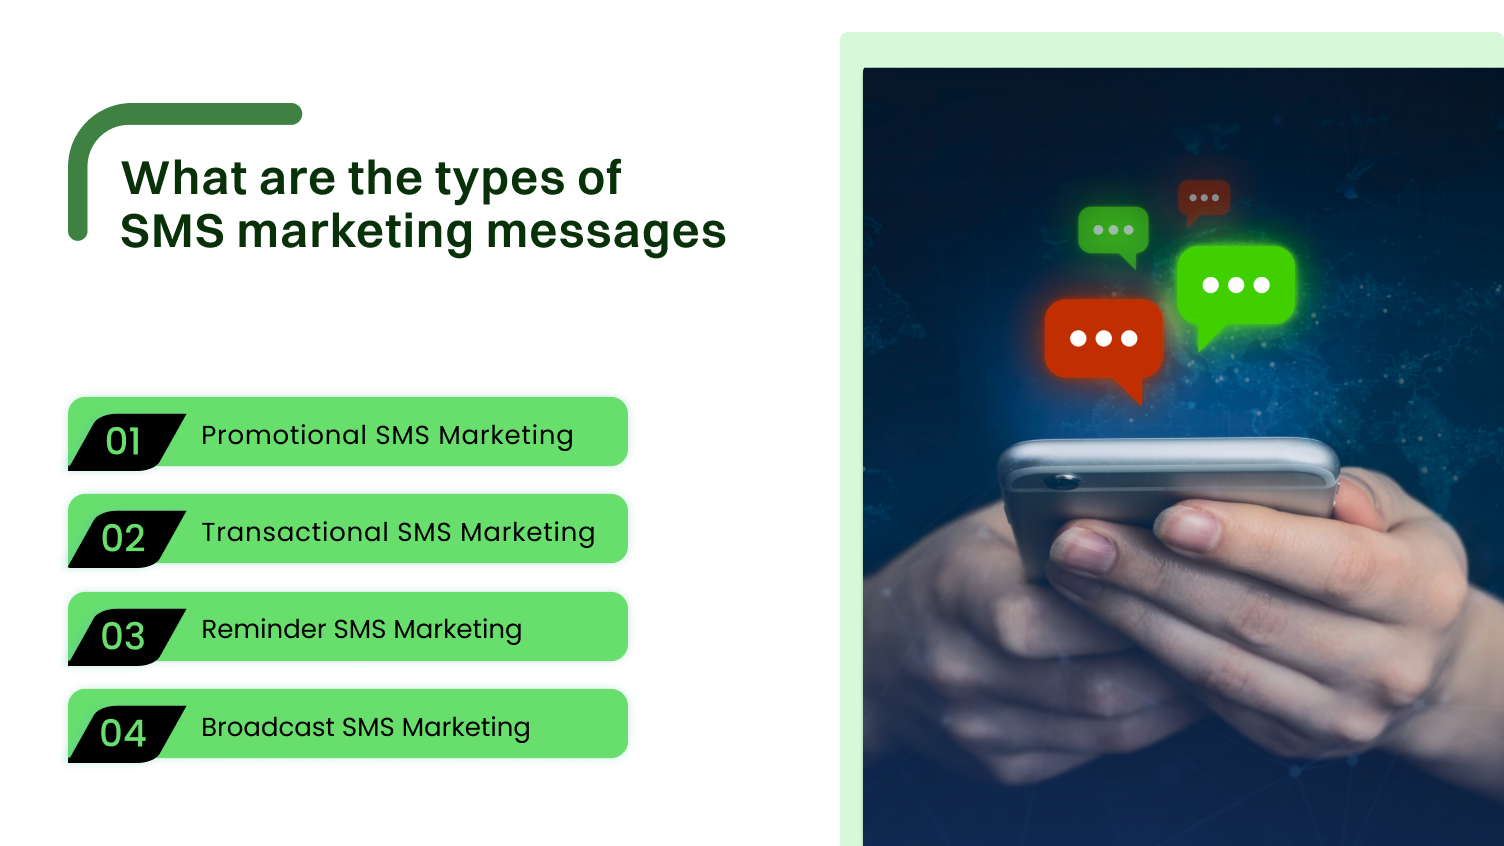 What are the types of SMS marketing messages?